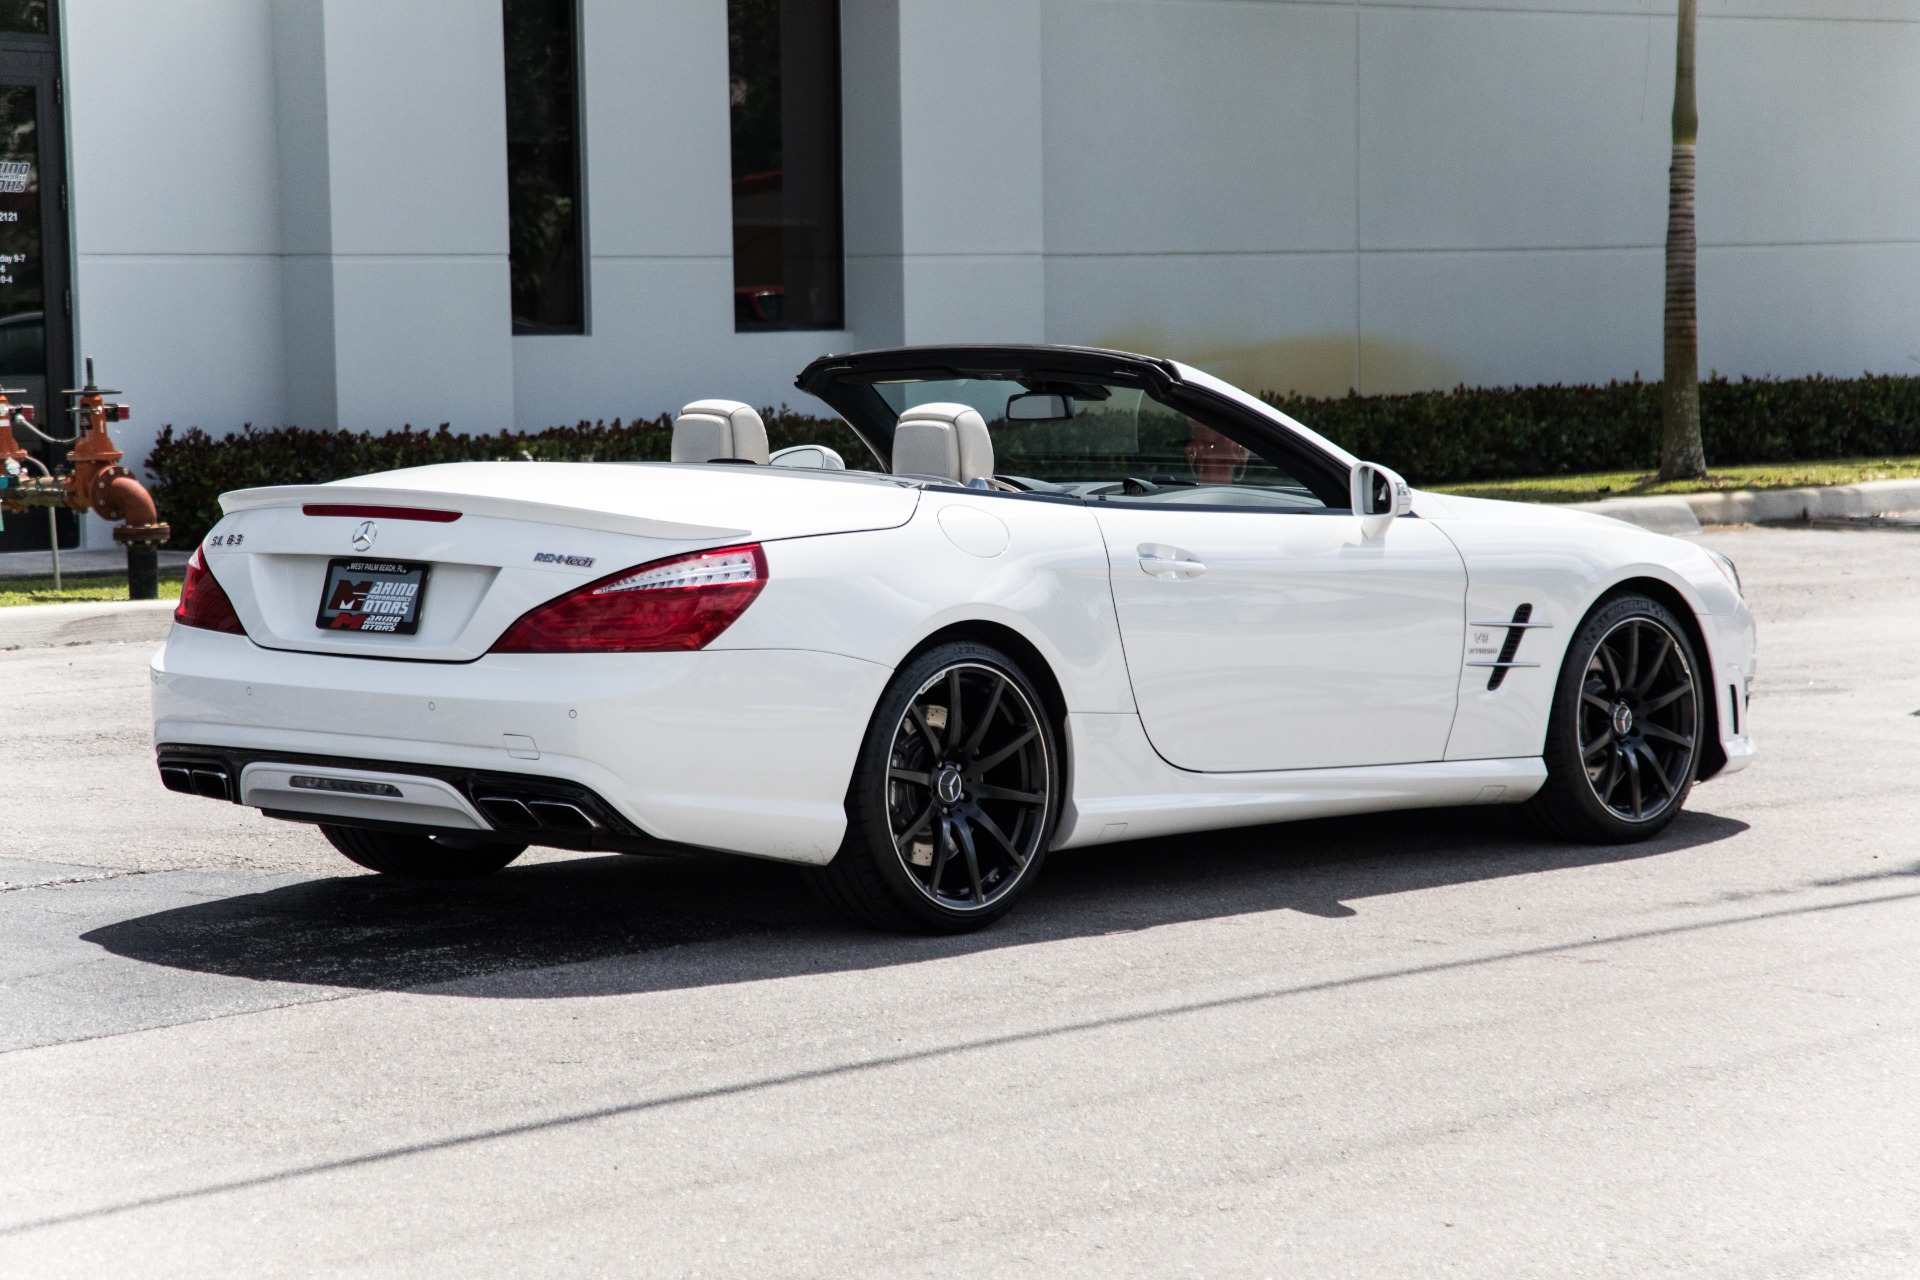 Used 2014 MercedesBenz SLClass SL 63 AMG For Sale